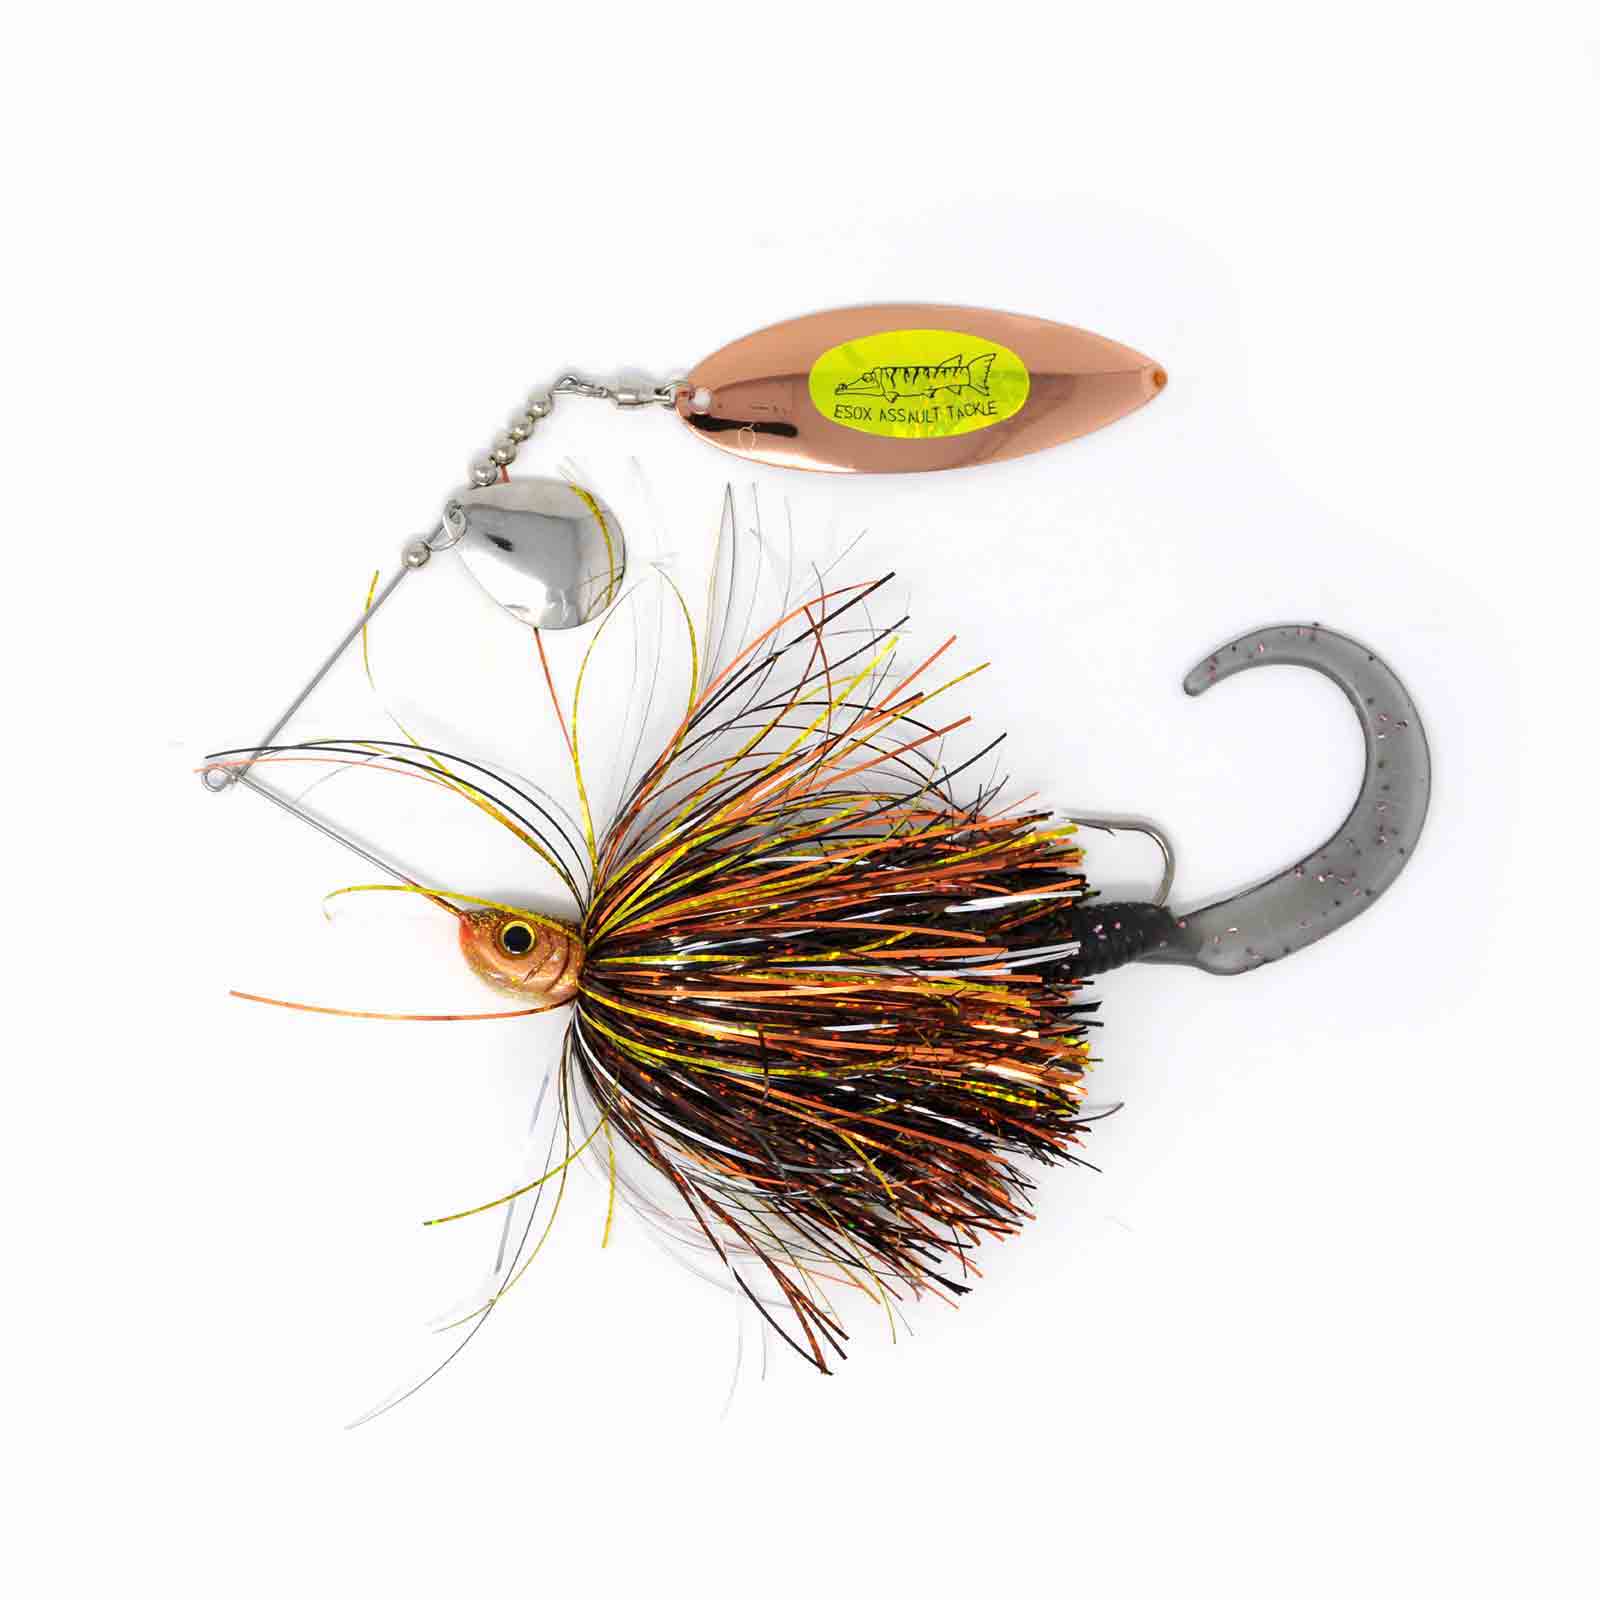 View of Spinnerbaits Esox Assault Spinnerbait Willow 1oz Killer Korn available at EZOKO Pike and Musky Shop